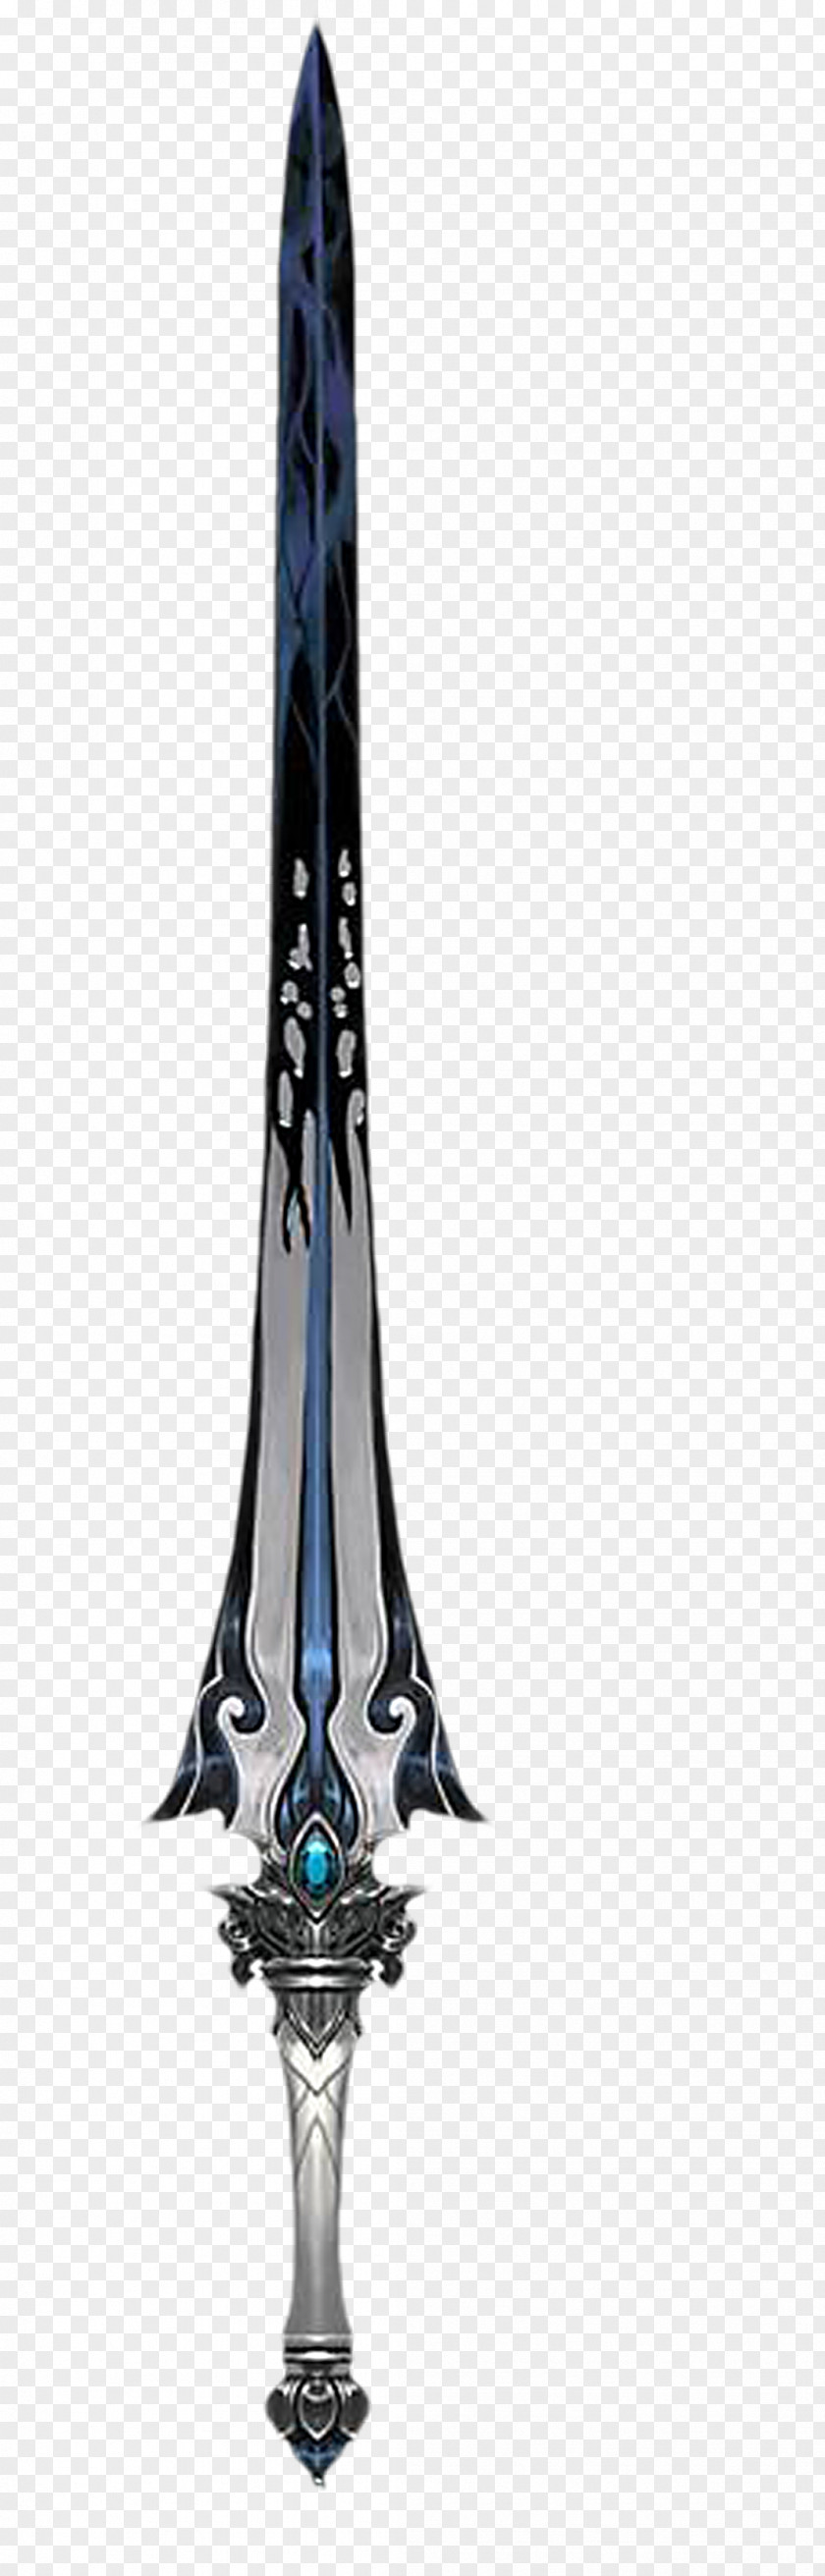 Antique Sword Heavenly Knife Weapon Scabbard PNG